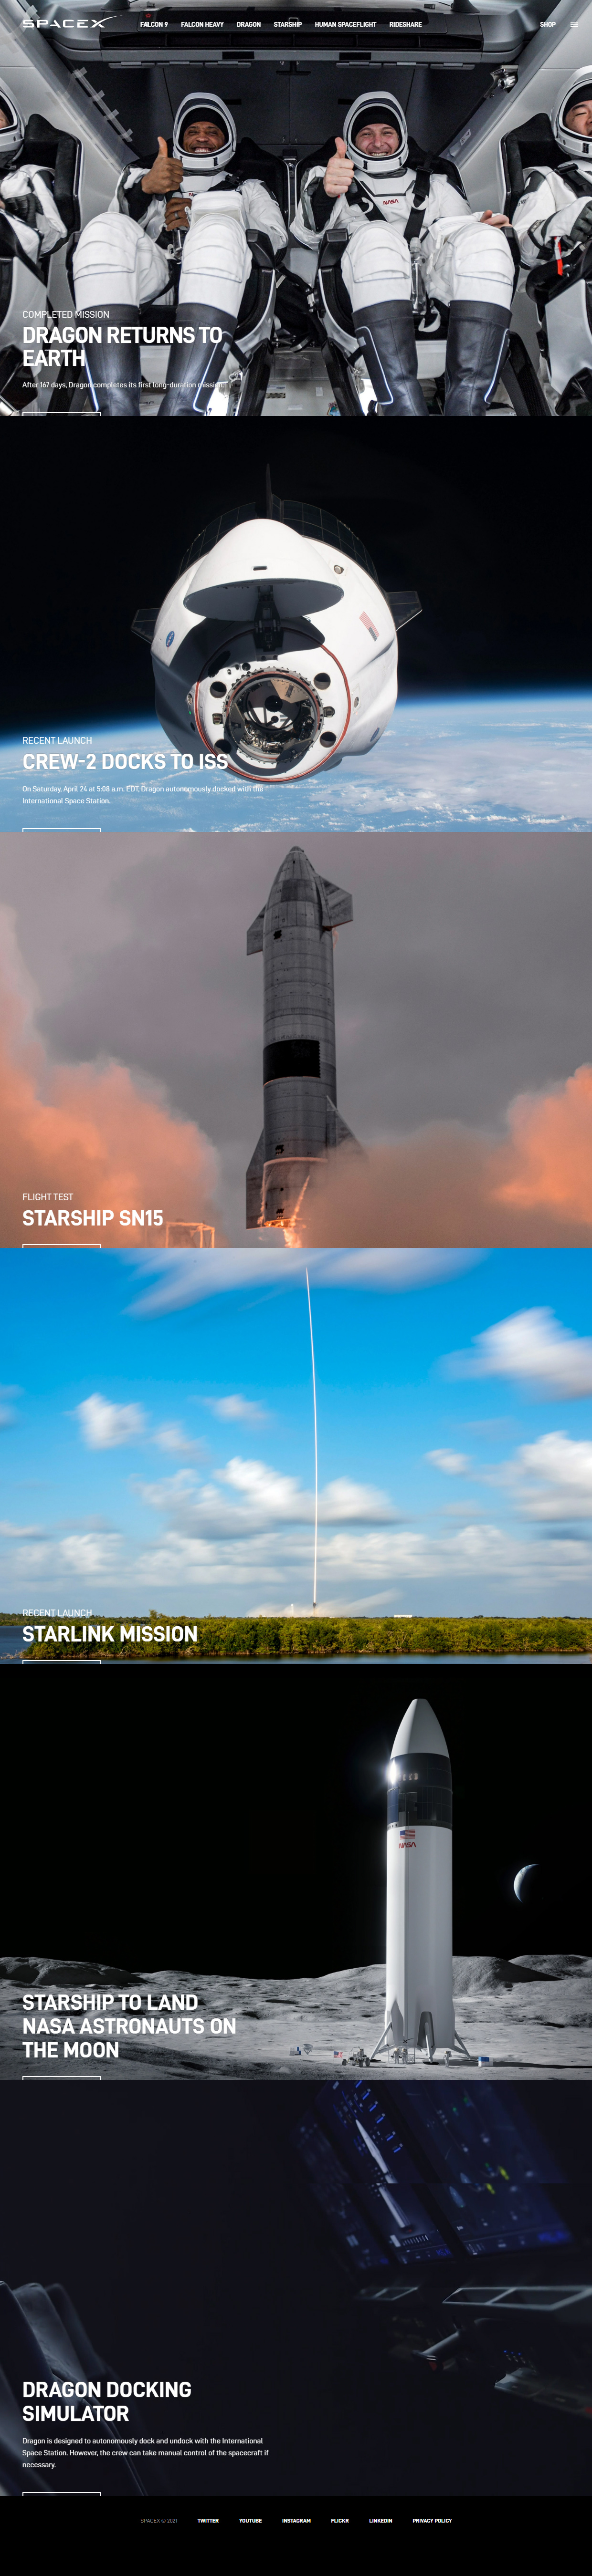 SpaceX in 2021